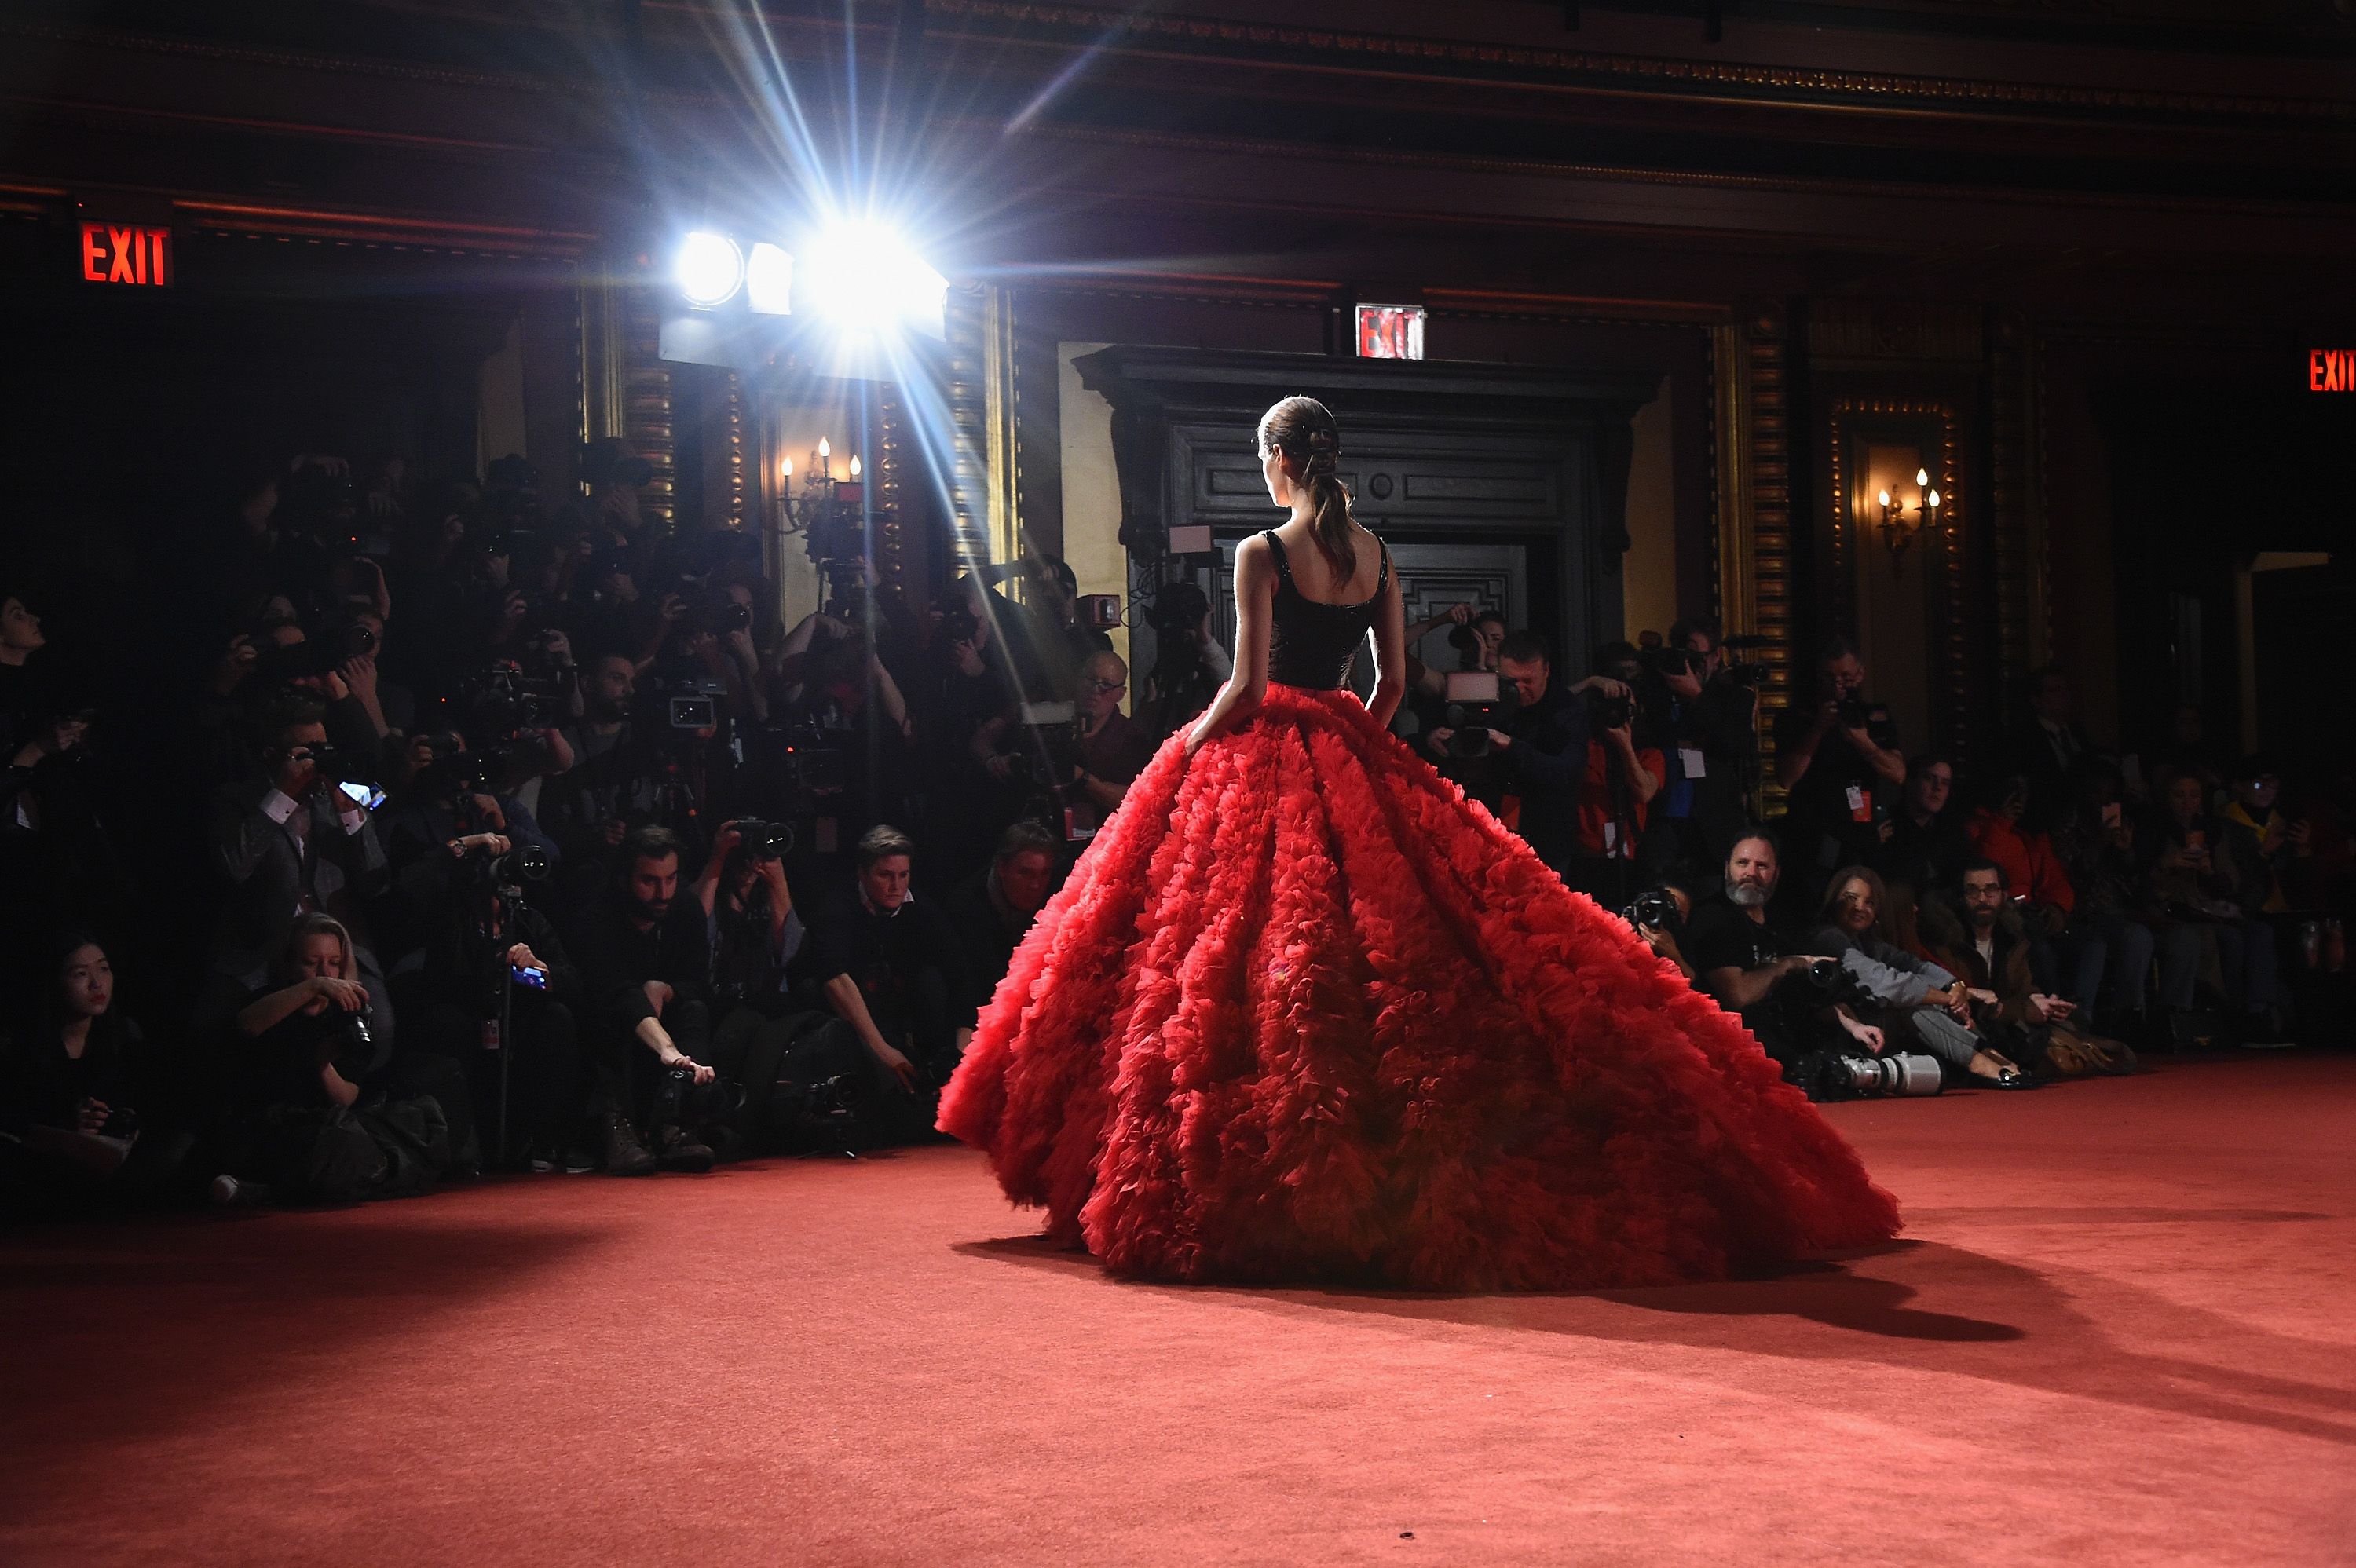 Christian Siriano Celebrated Diversity in Fashion With A Stunning